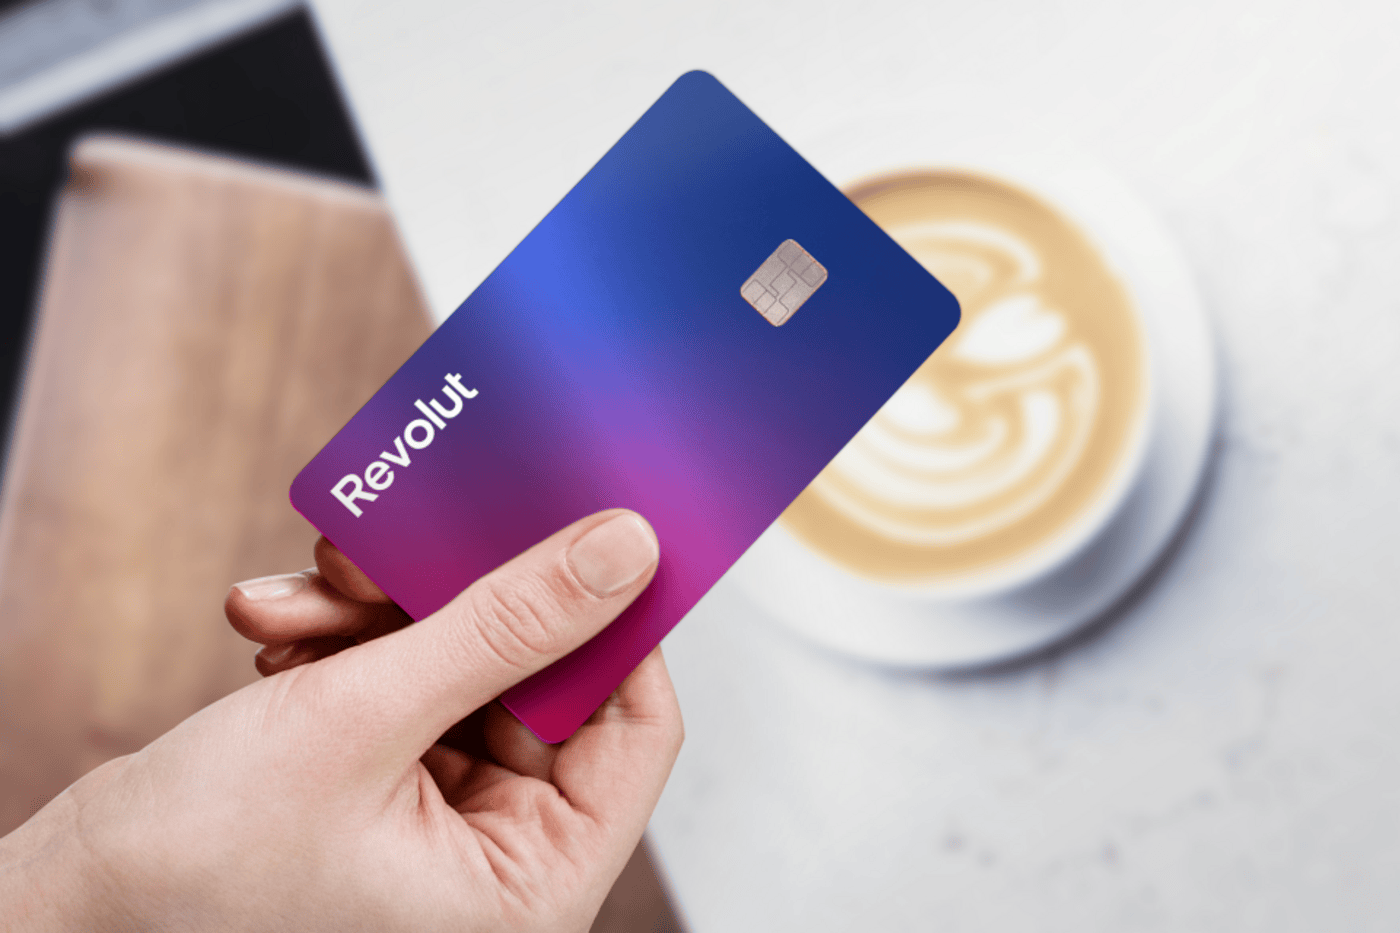 Online Bank Revolut Launches Crypto Staking In The UK And EEA